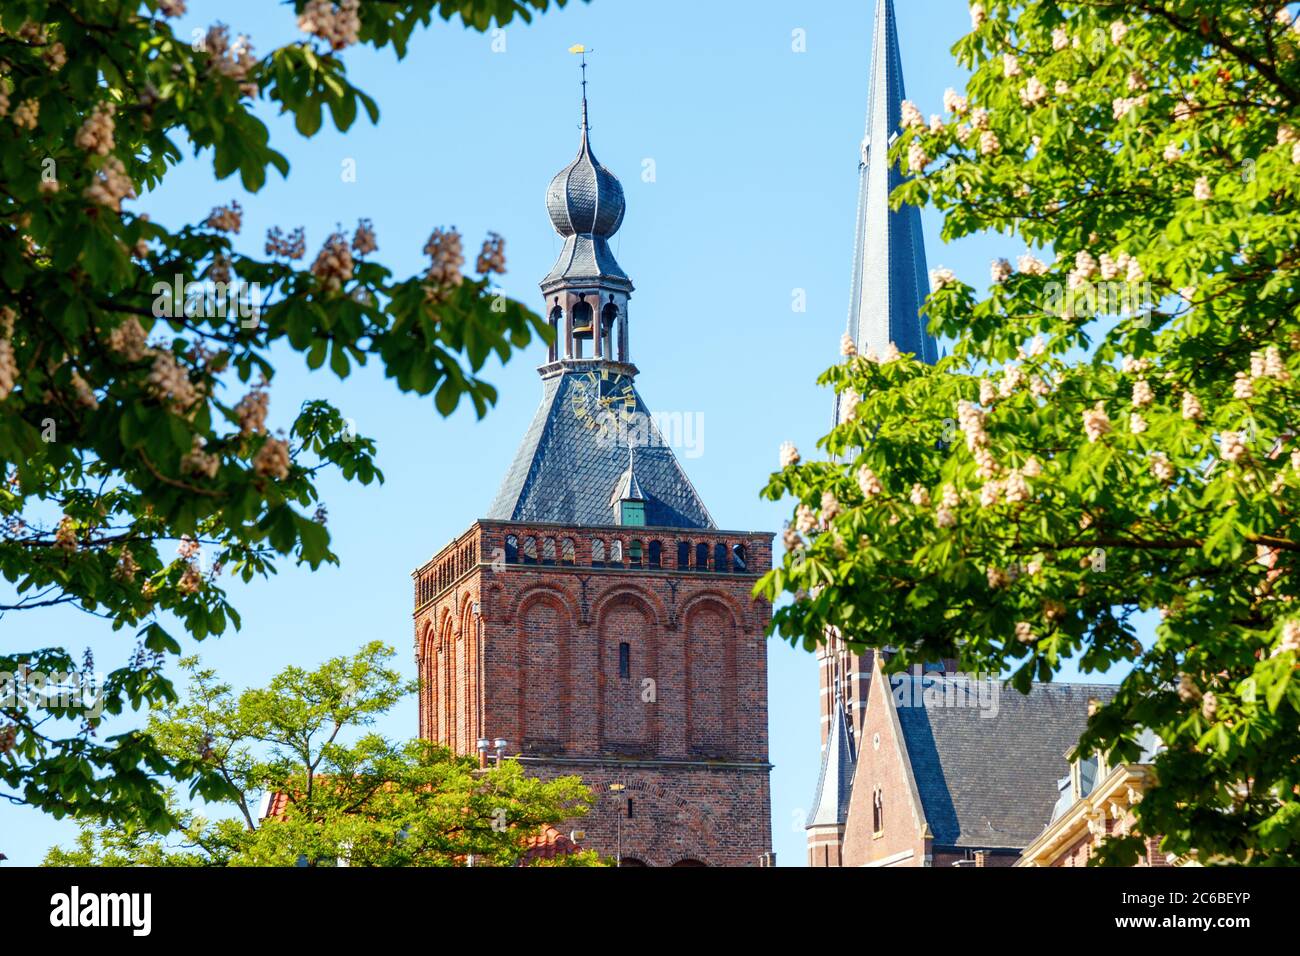 Culemborg. Blooming Chestnut trees (Castanea) and the spires of the Binnenpoort and the St. Barbara church tower. Gelderland, The Netherlands. Stock Photo